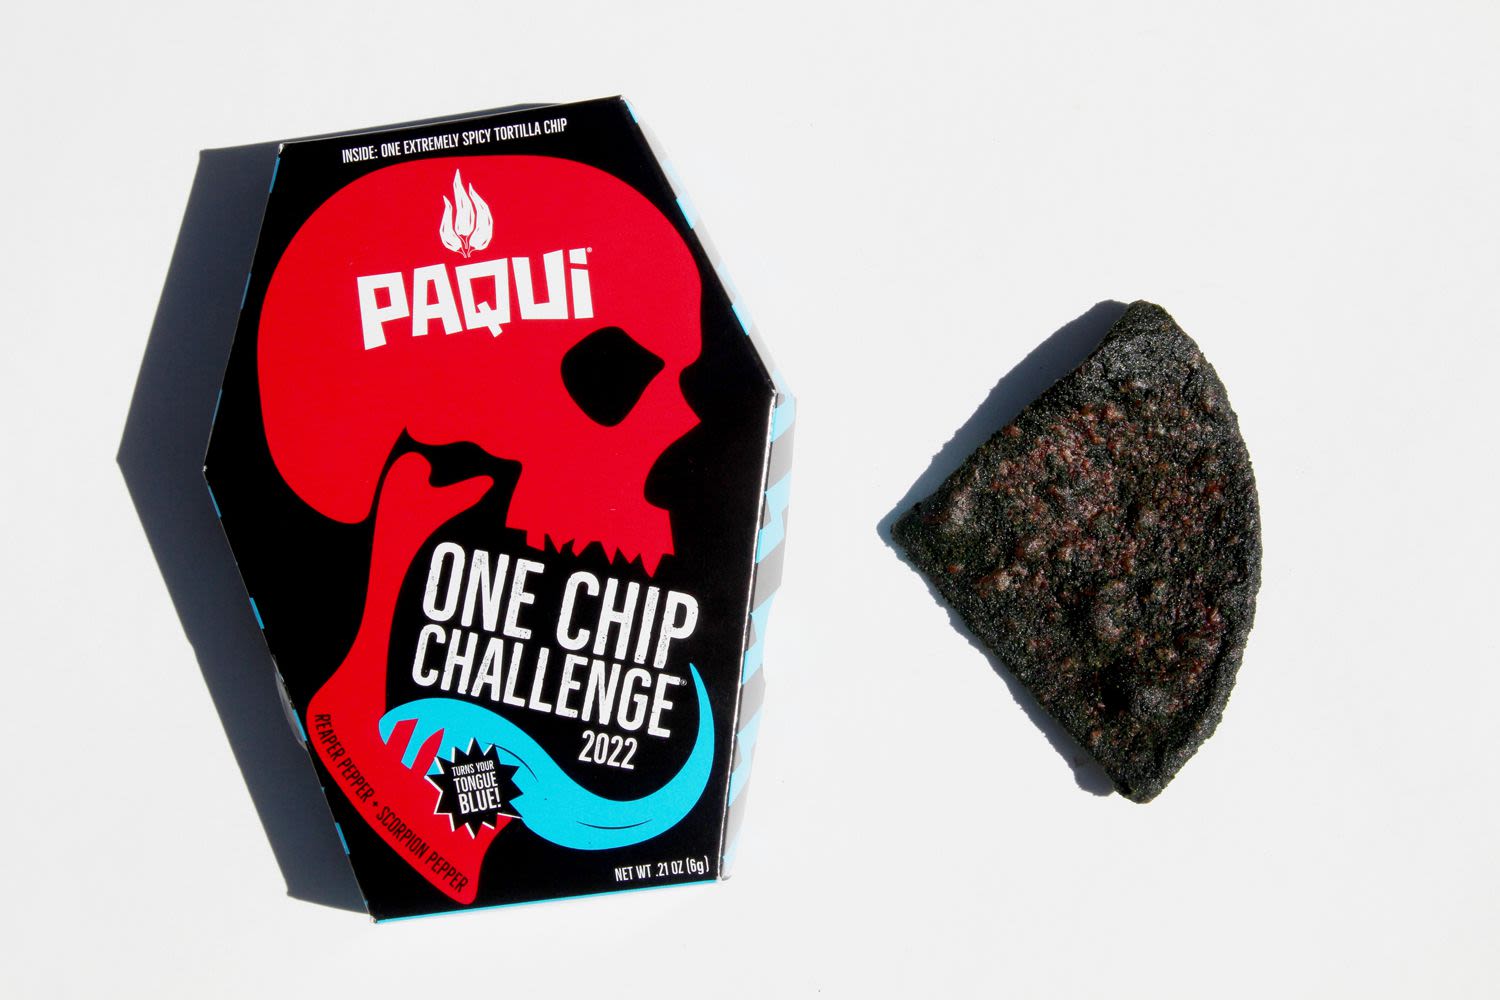 Paqui Confirms 'One Chip Challenge' Is Officially Discontinued, Responds to Teen's Death After Eating the Spicy Chip